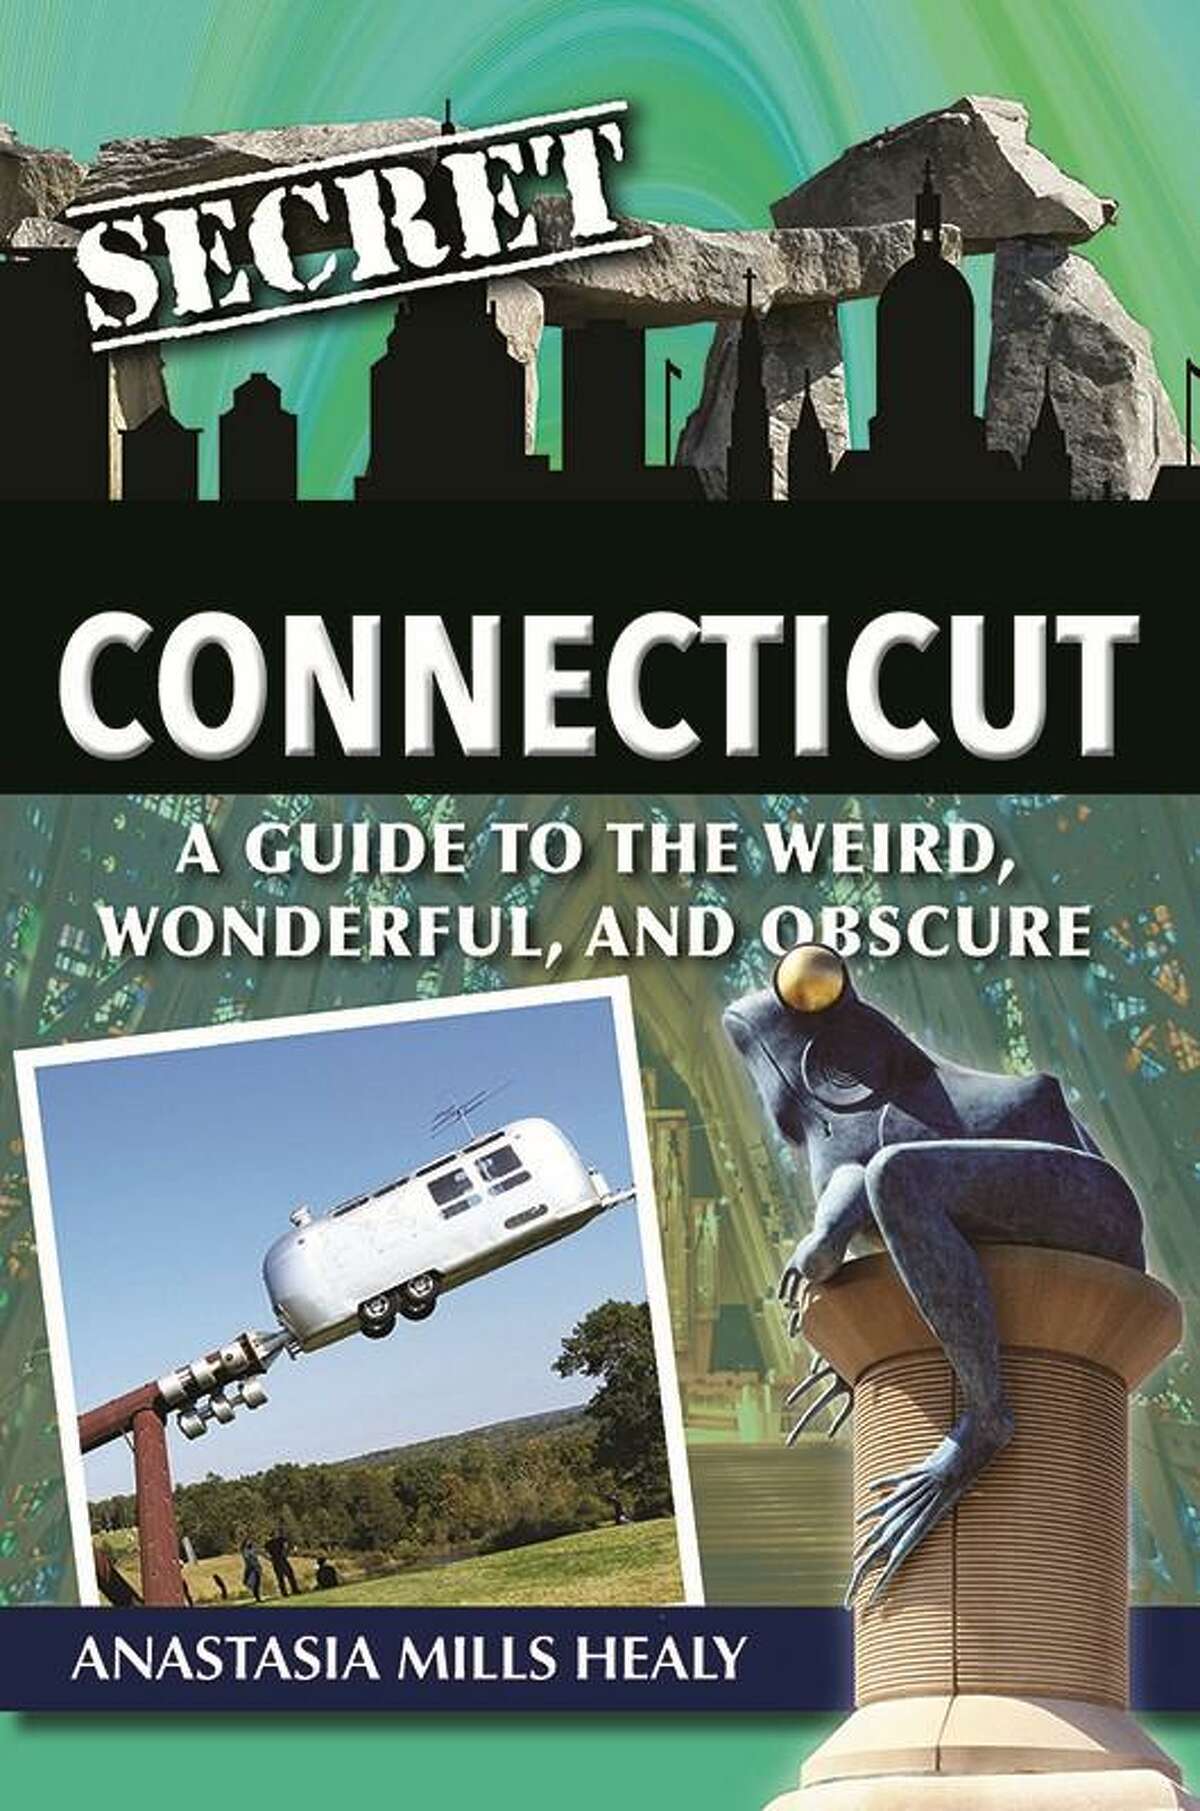 Travel writer and Greenwich resident Anastasia Mills Healy wrote about Connecticut’s quirky history in “Secret Connecticut: Guide to Weird, Wonderful and Obscure.”